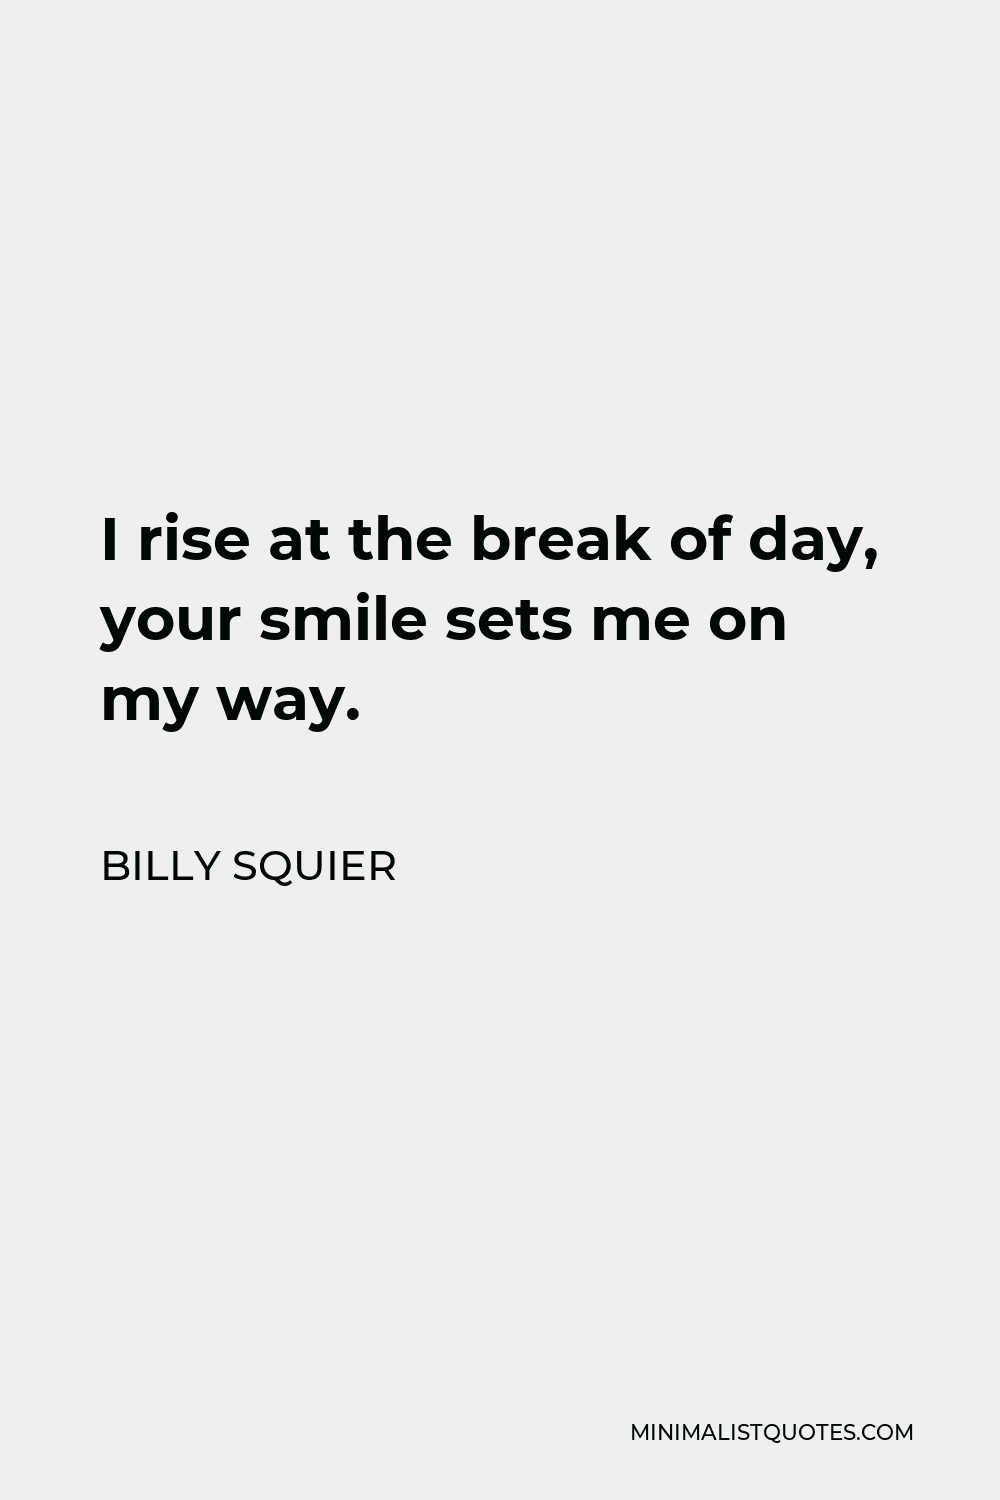 Billy Squier Quote - I rise at the break of day, your smile sets me on my way.